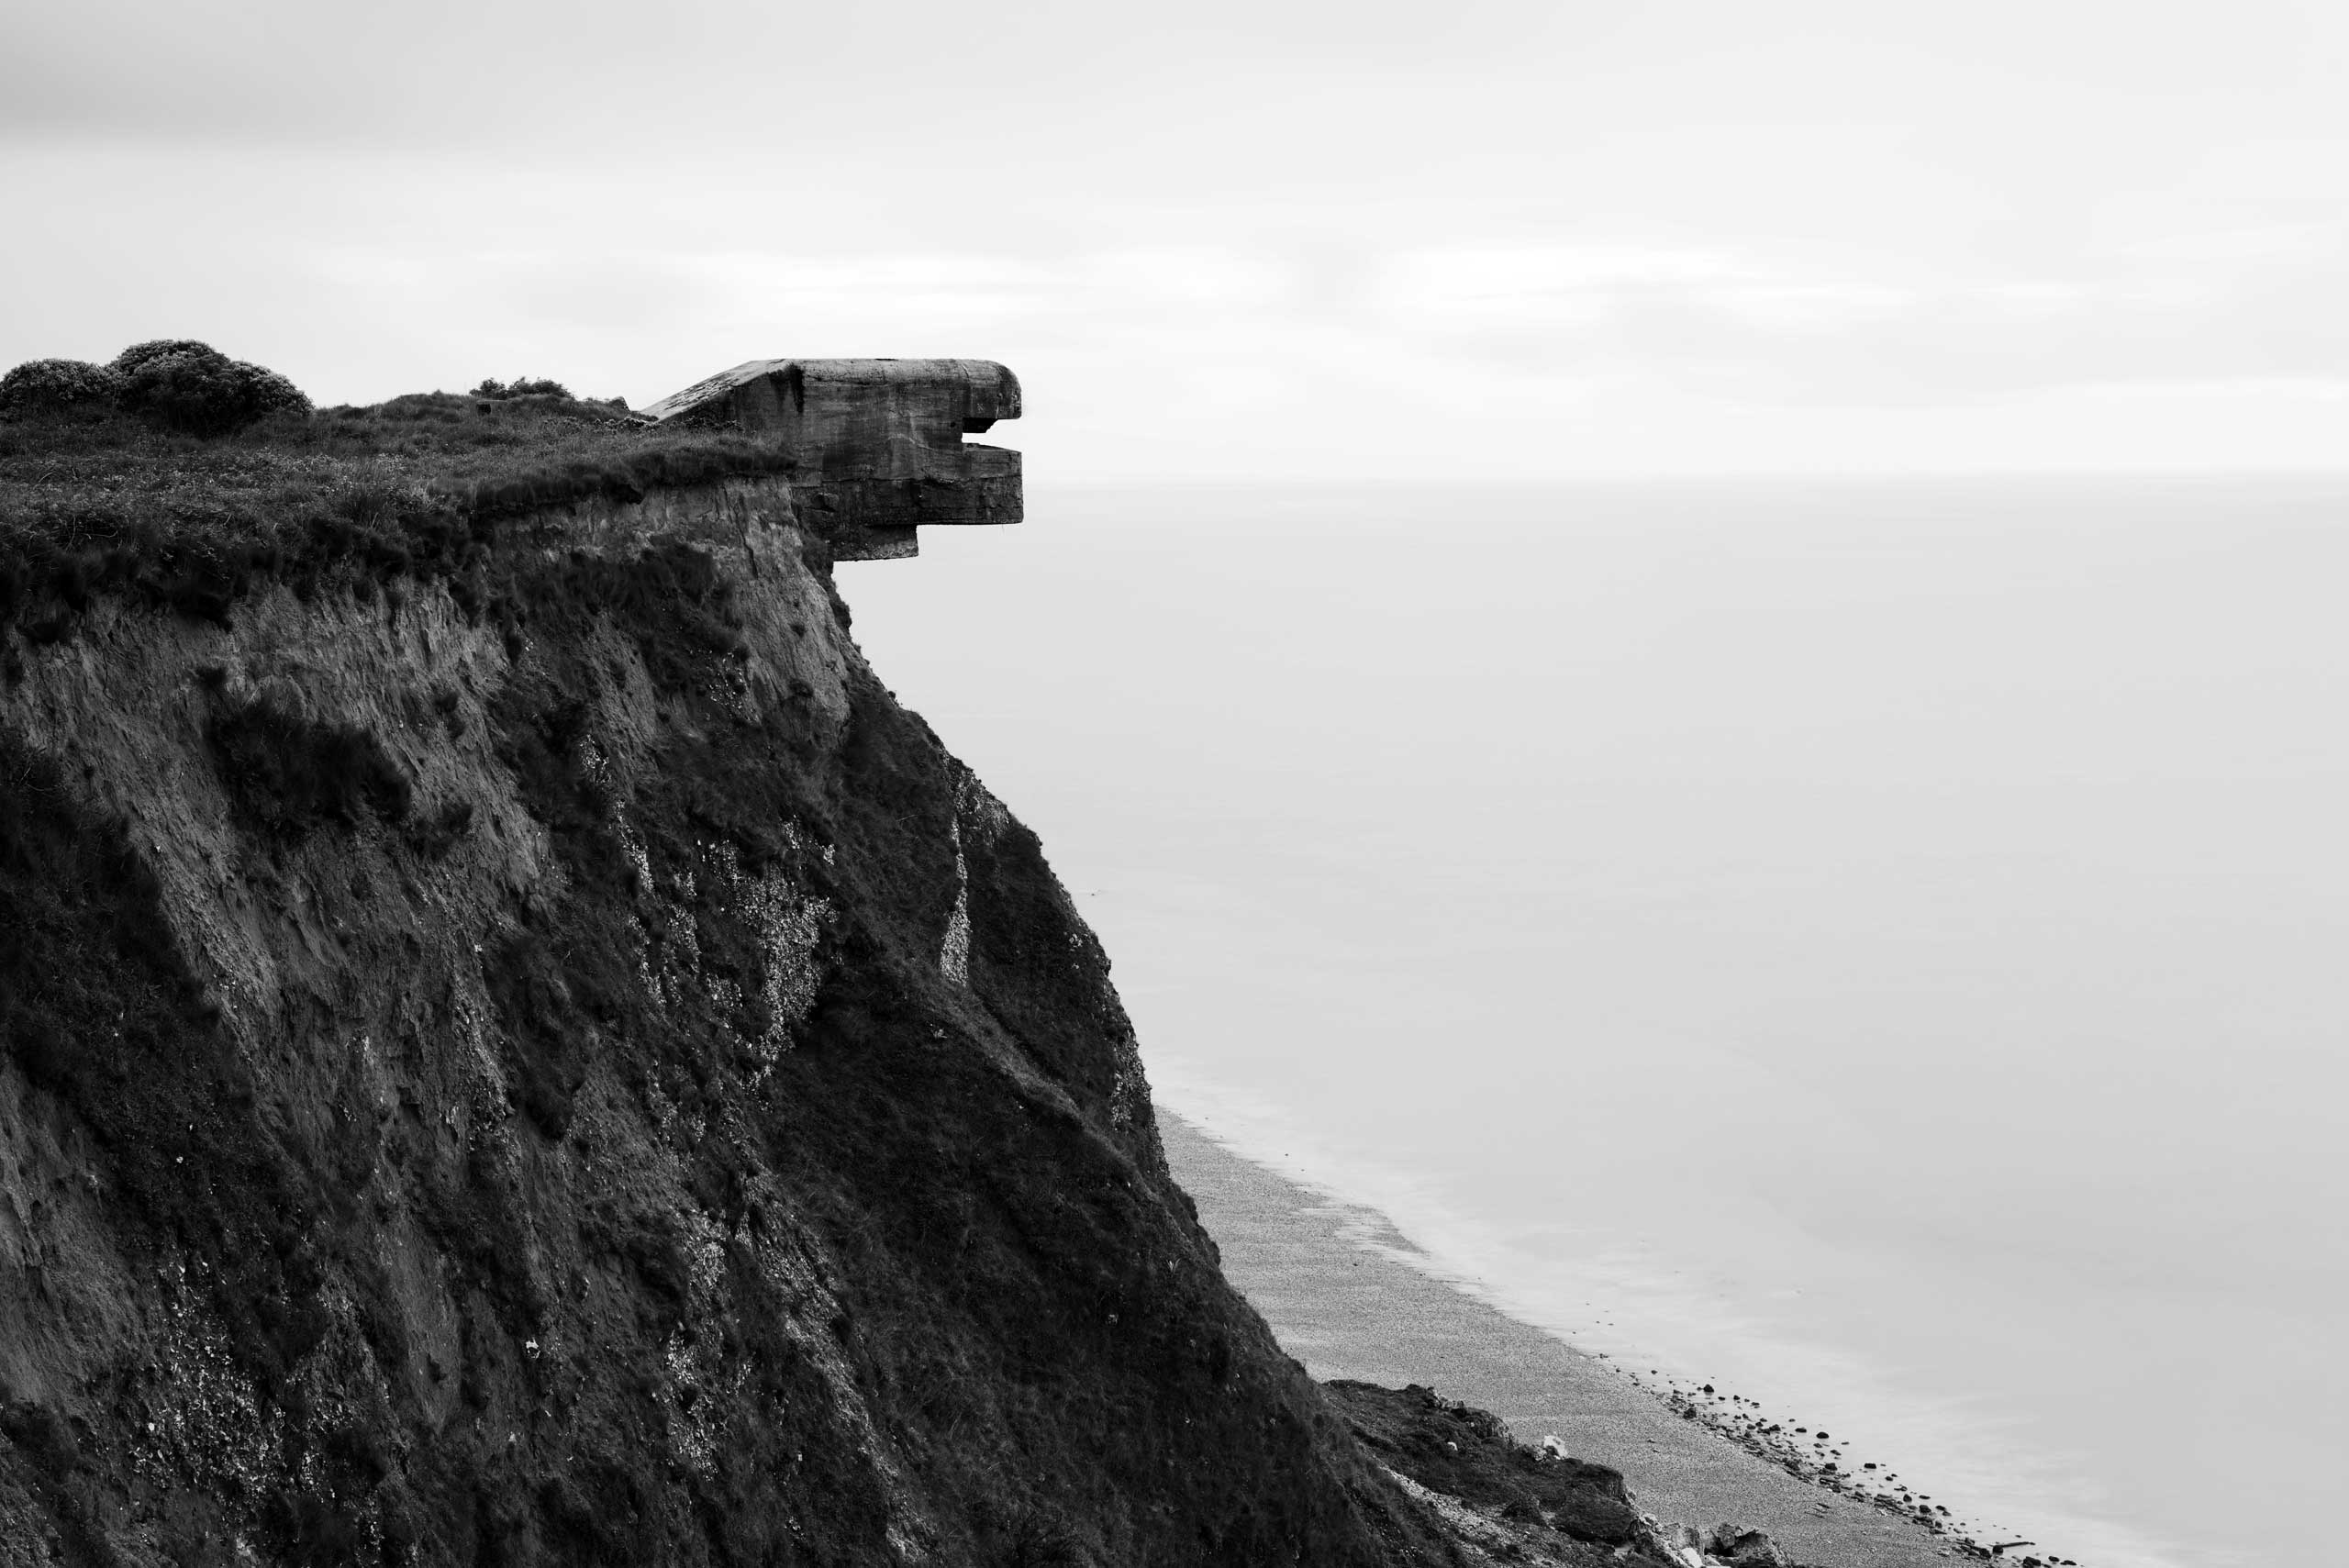 A concrete bunker used by the German Army in World War II sits atop a hill along the route of the Atlantic Wall (Atlantikwall in German).